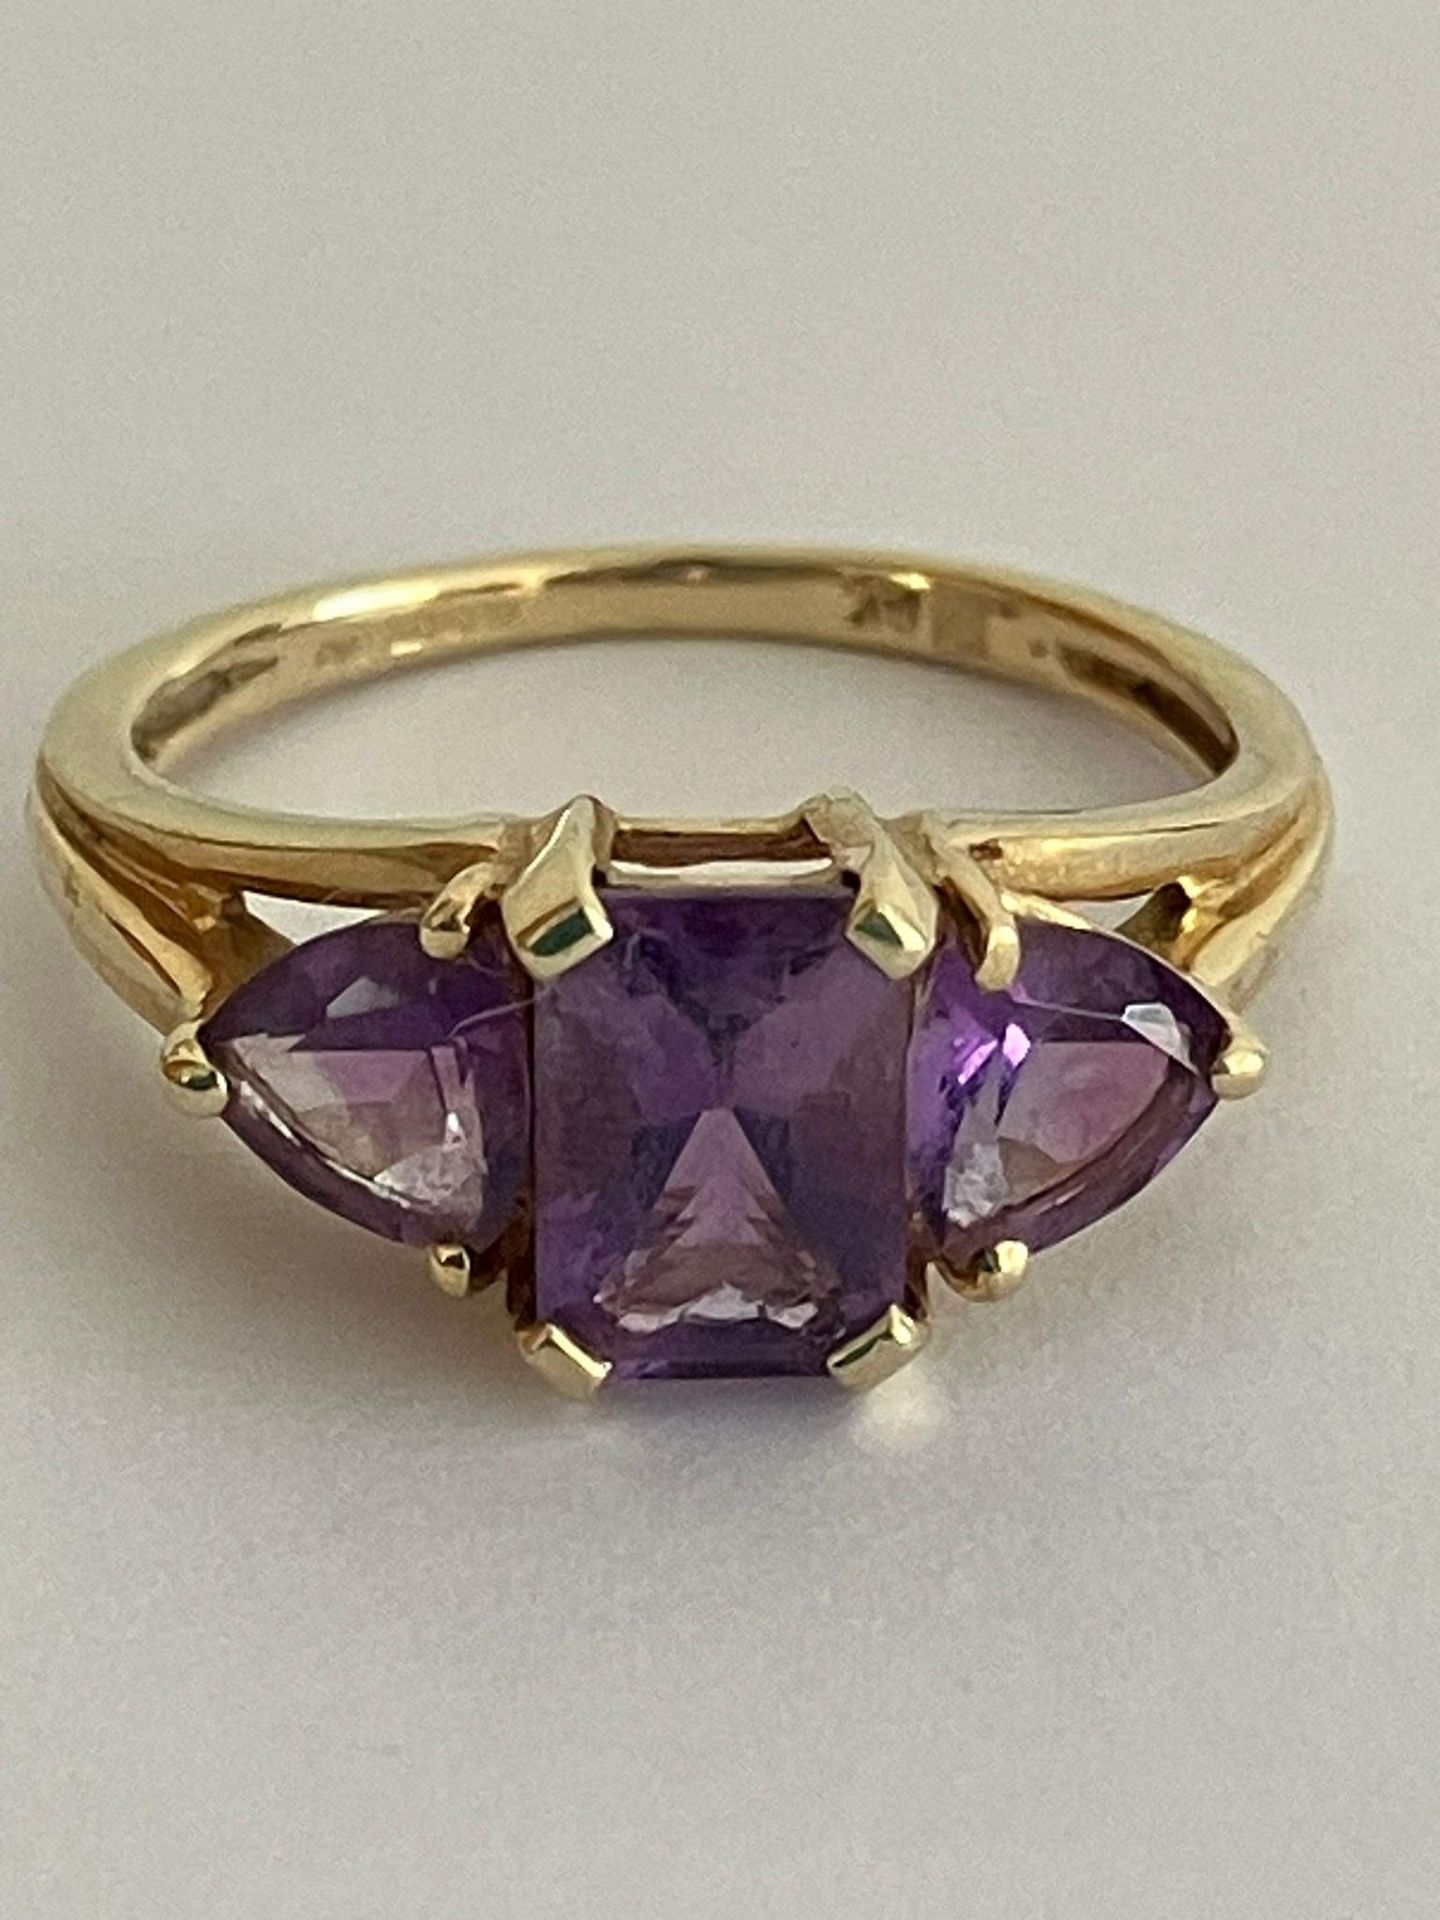 9 carat YELLOW GOLD RING set with AMETHYST GEMSTONES. Mounted in trilogy style, Consisting an (0.